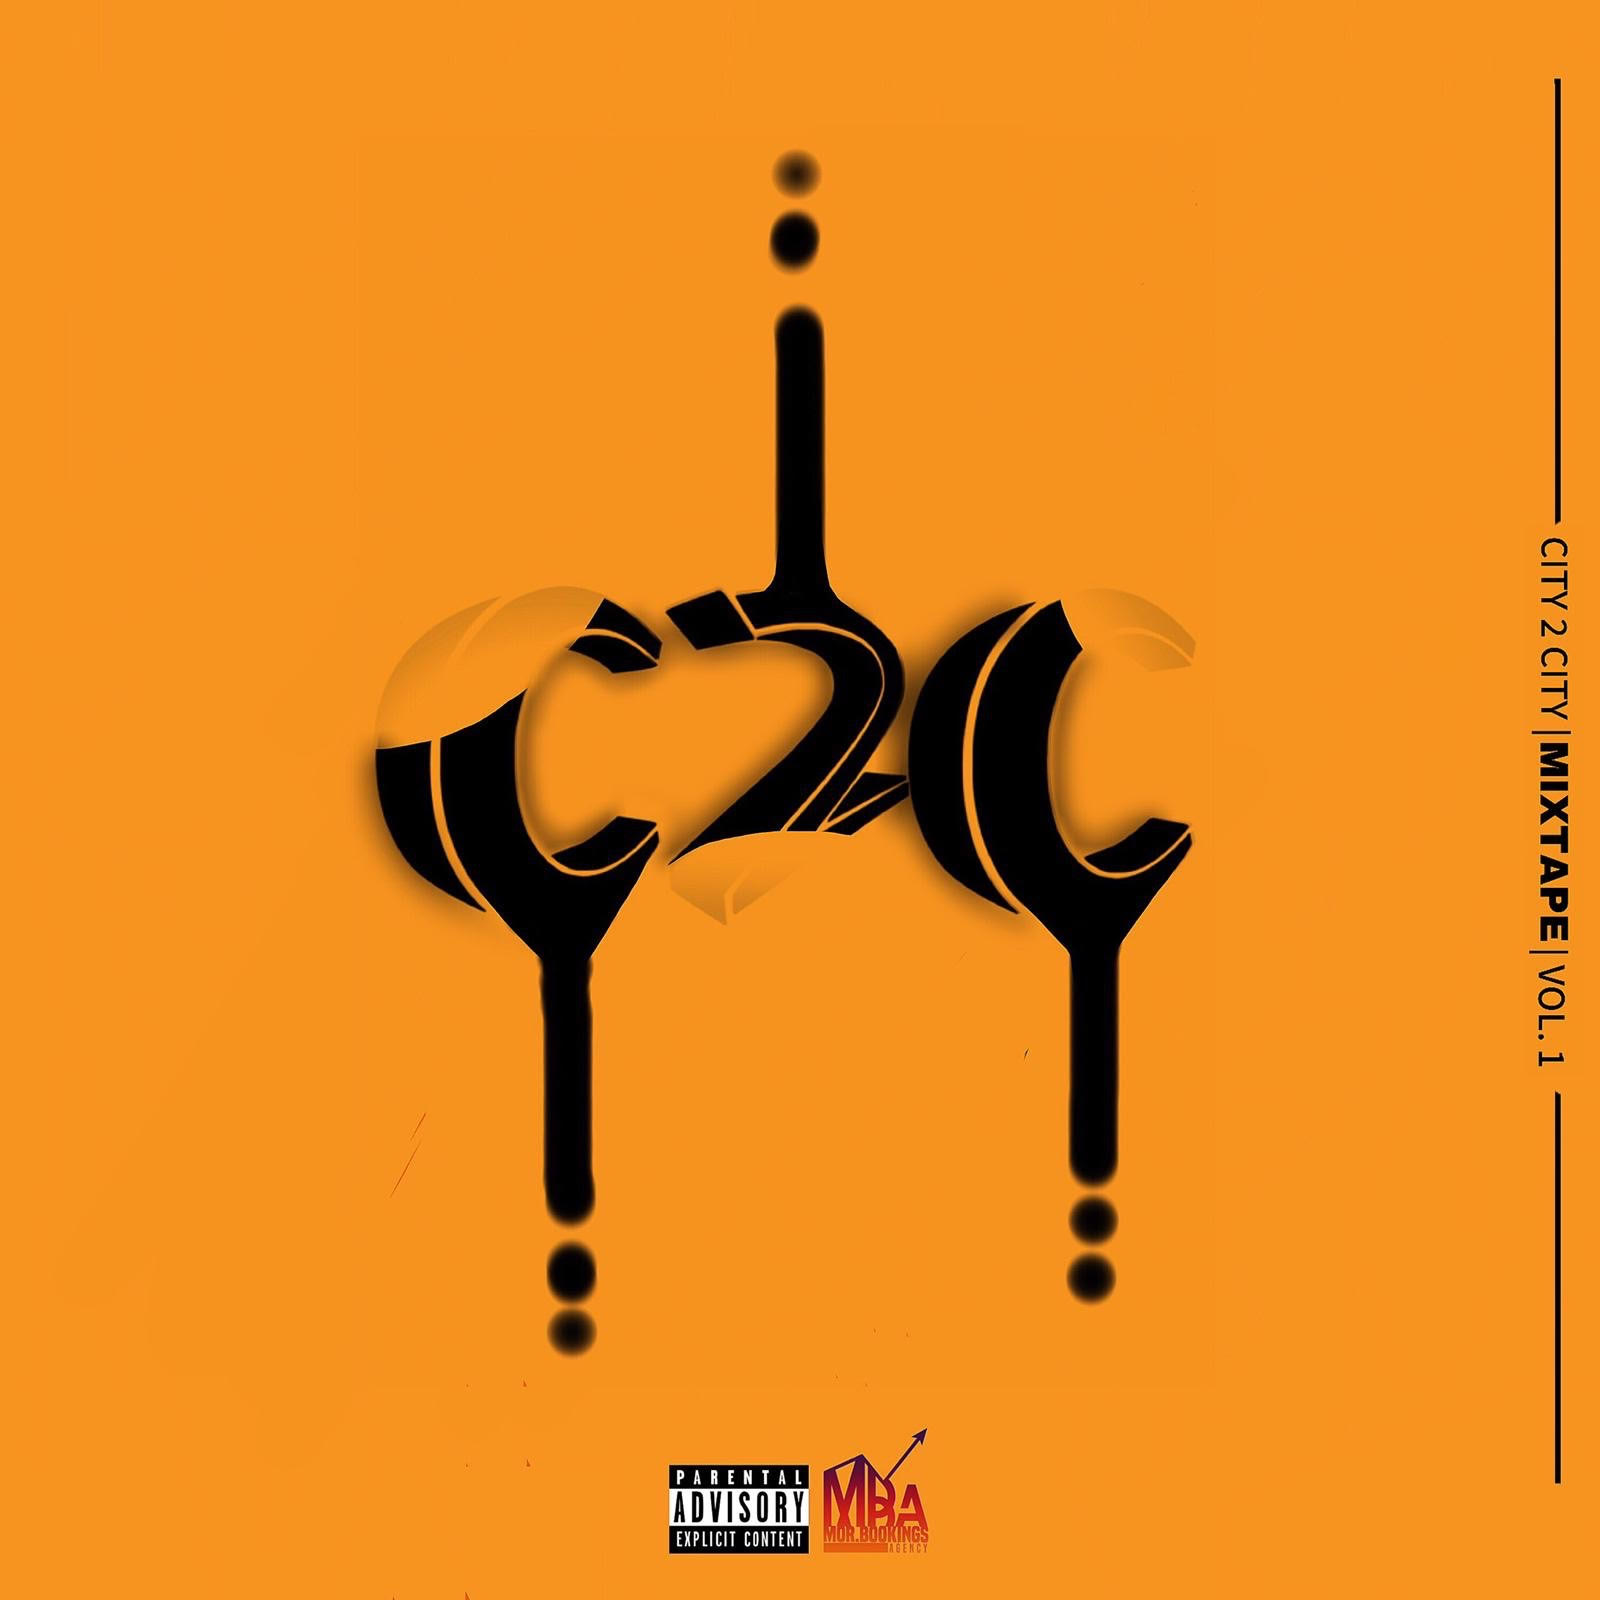 Mor.bookings Agency launches new mixtape series called “C2C” (City 2 City)